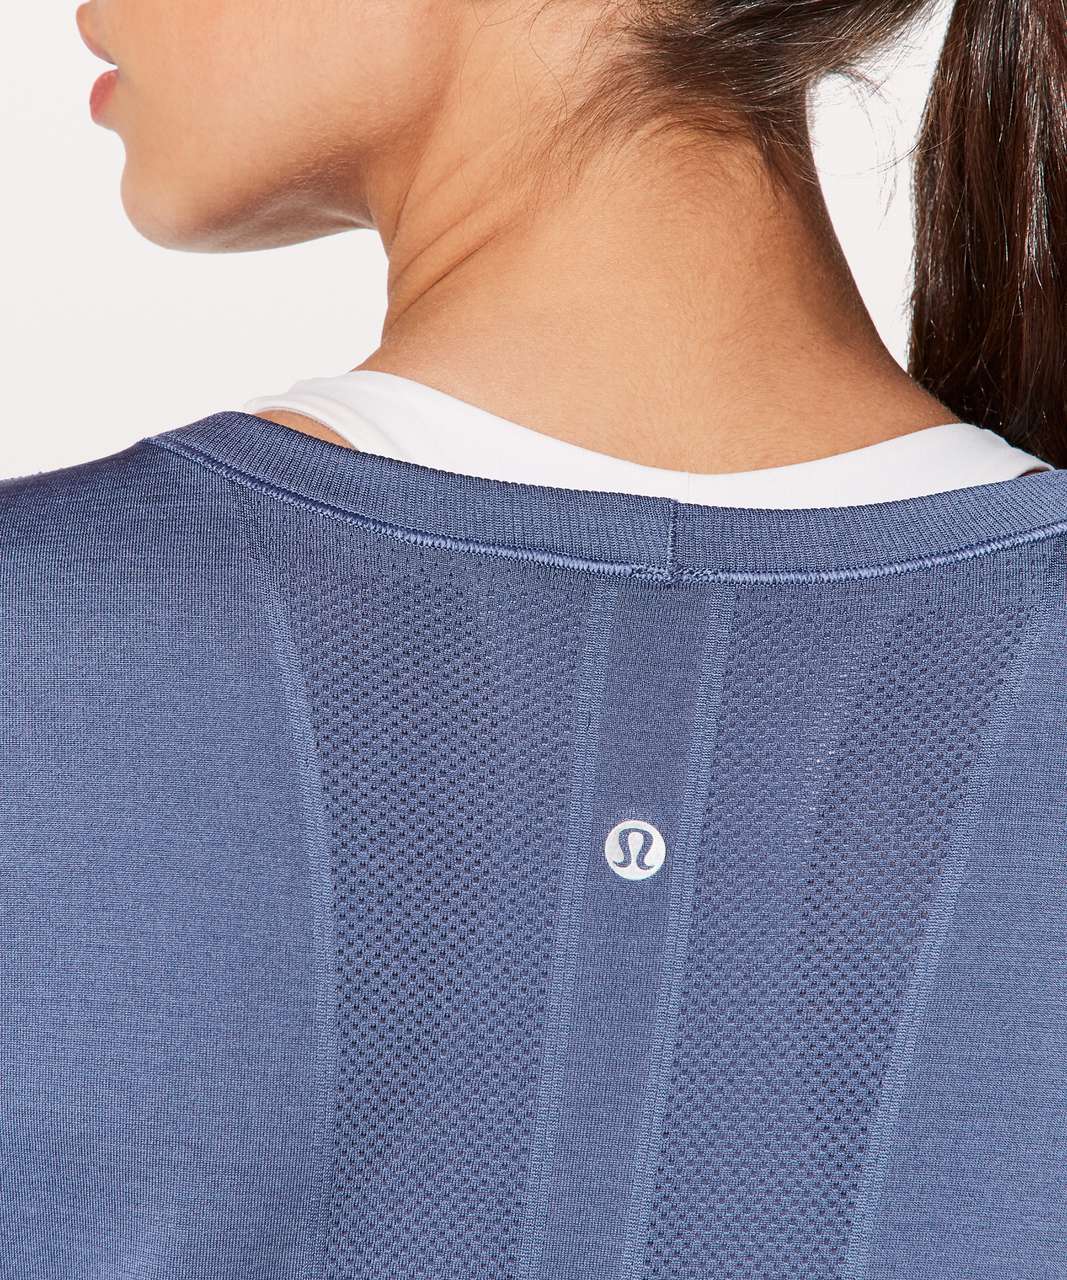 Lululemon Swiftly Tech Long Sleeve (Breeze) *Relaxed Fit - Brilliant Blue / Brilliant Blue